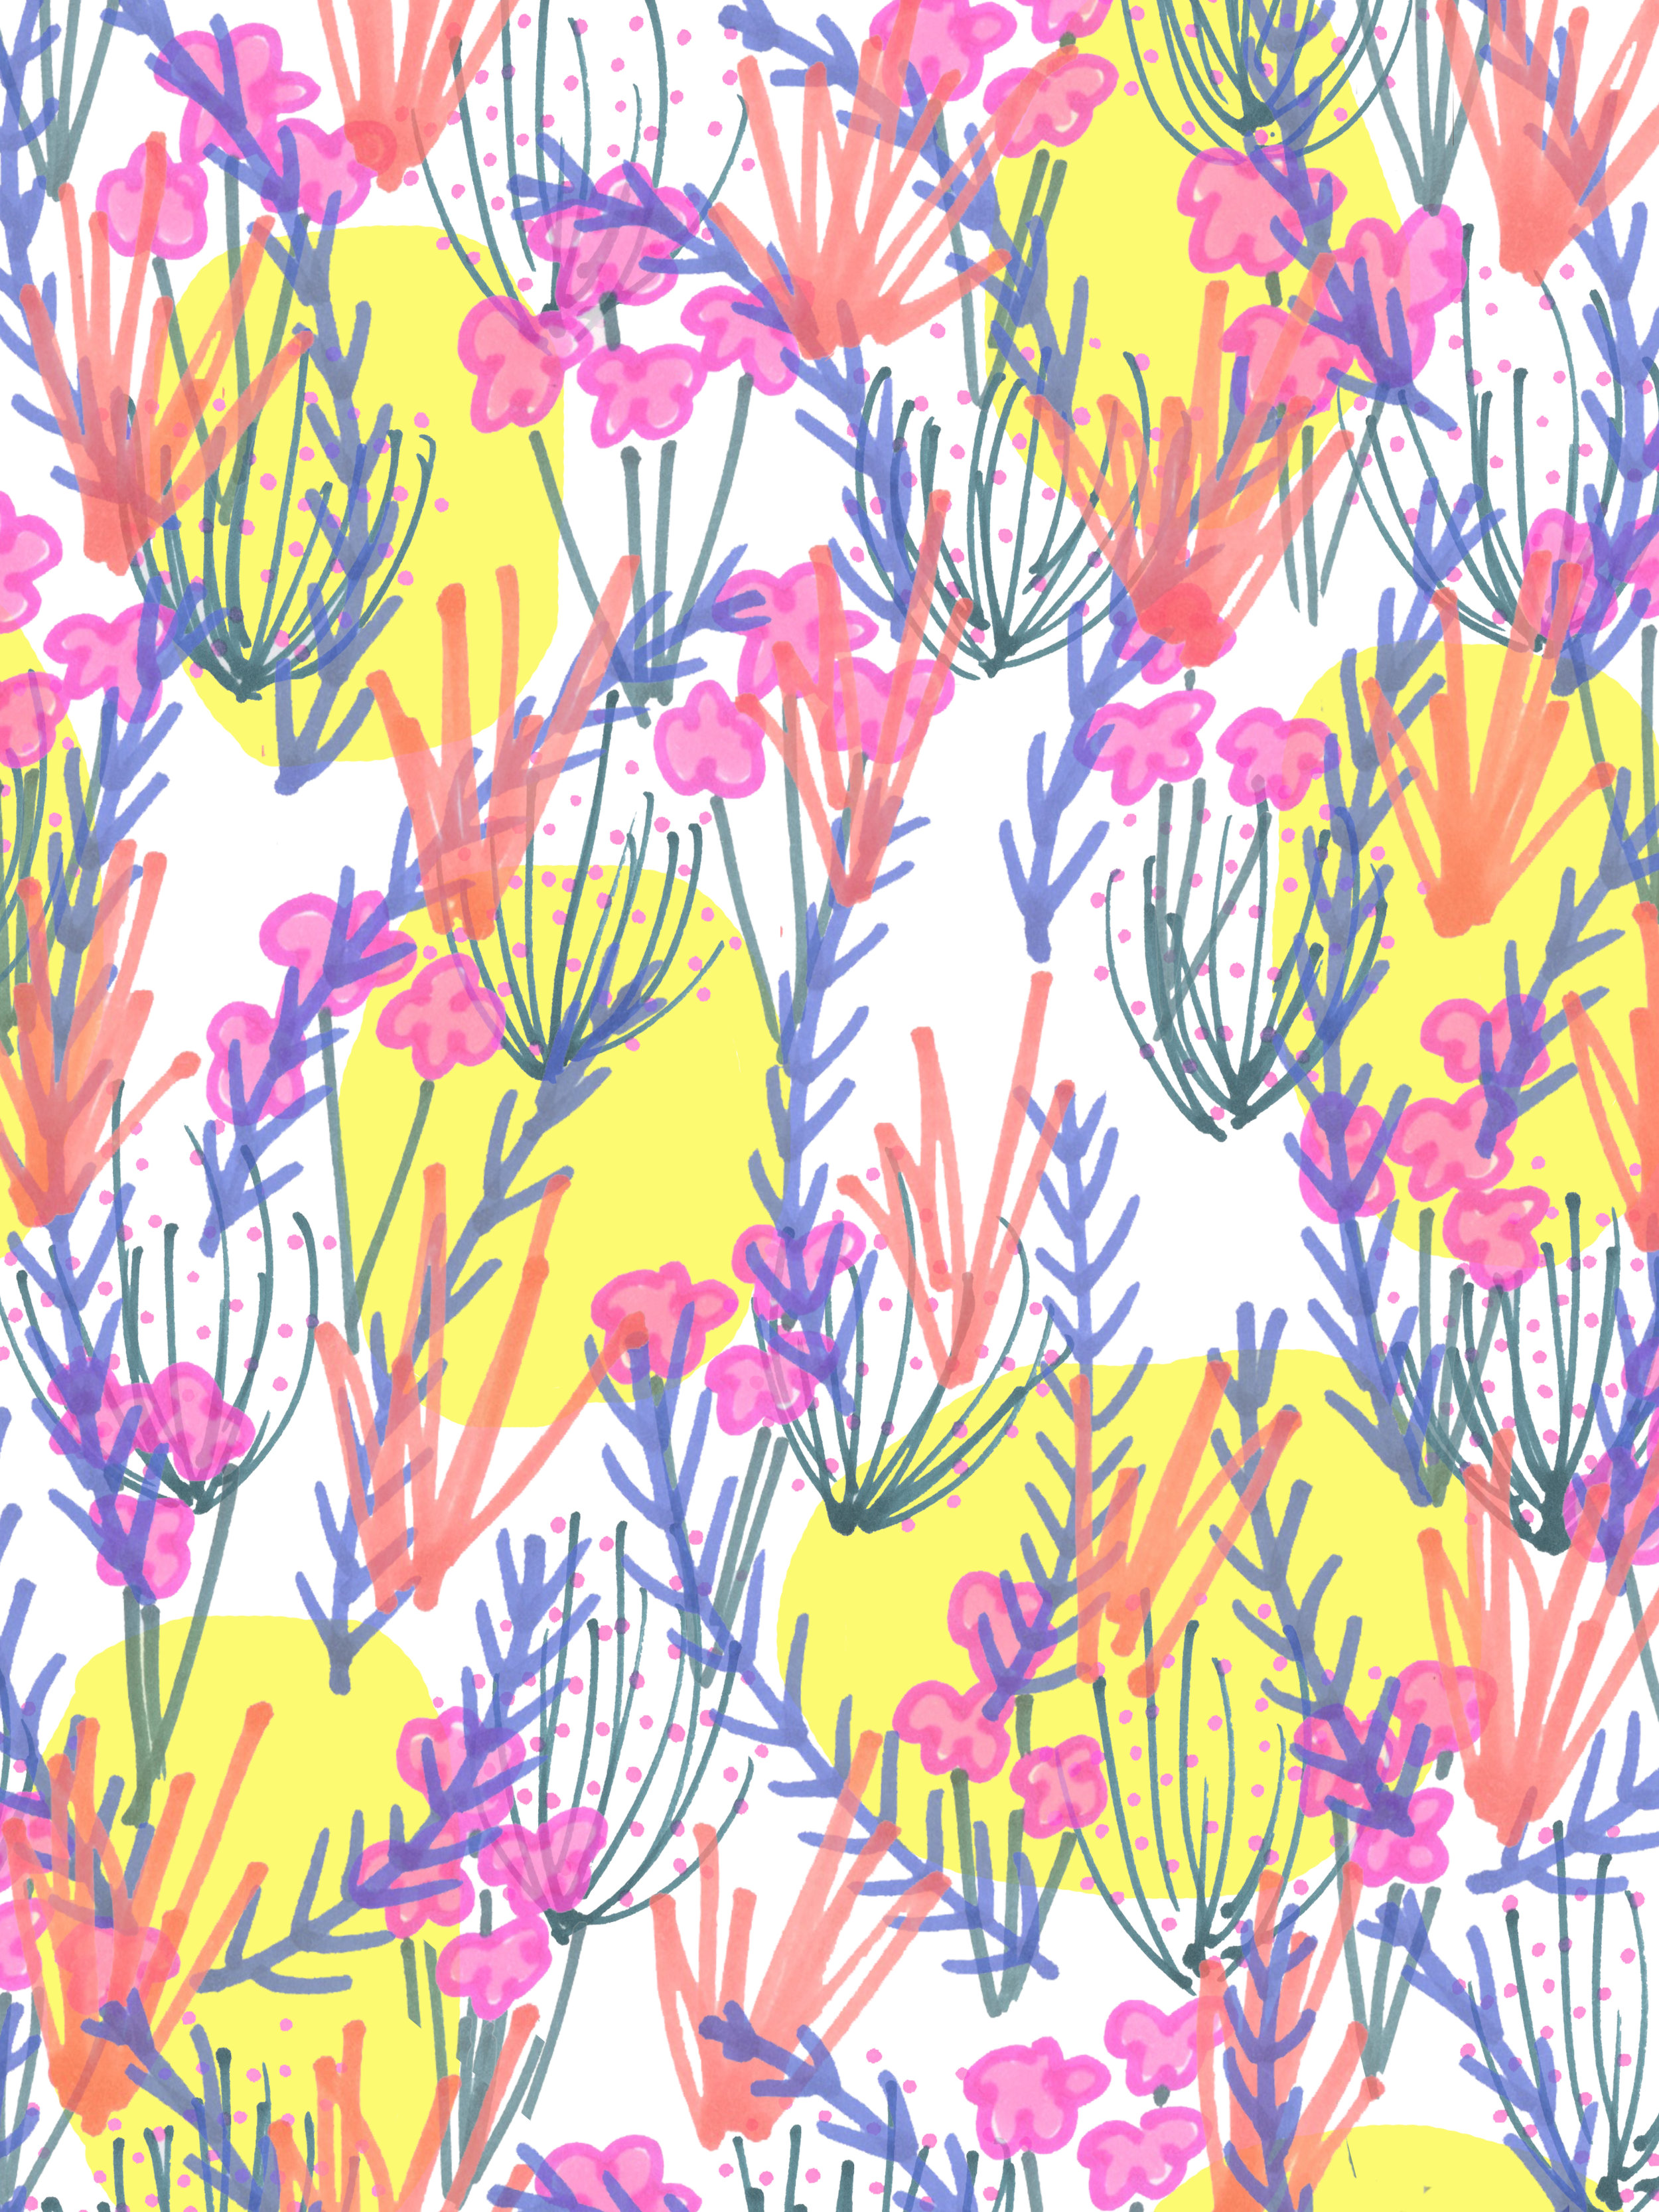 Markers Layered Floral Pattern.jpg